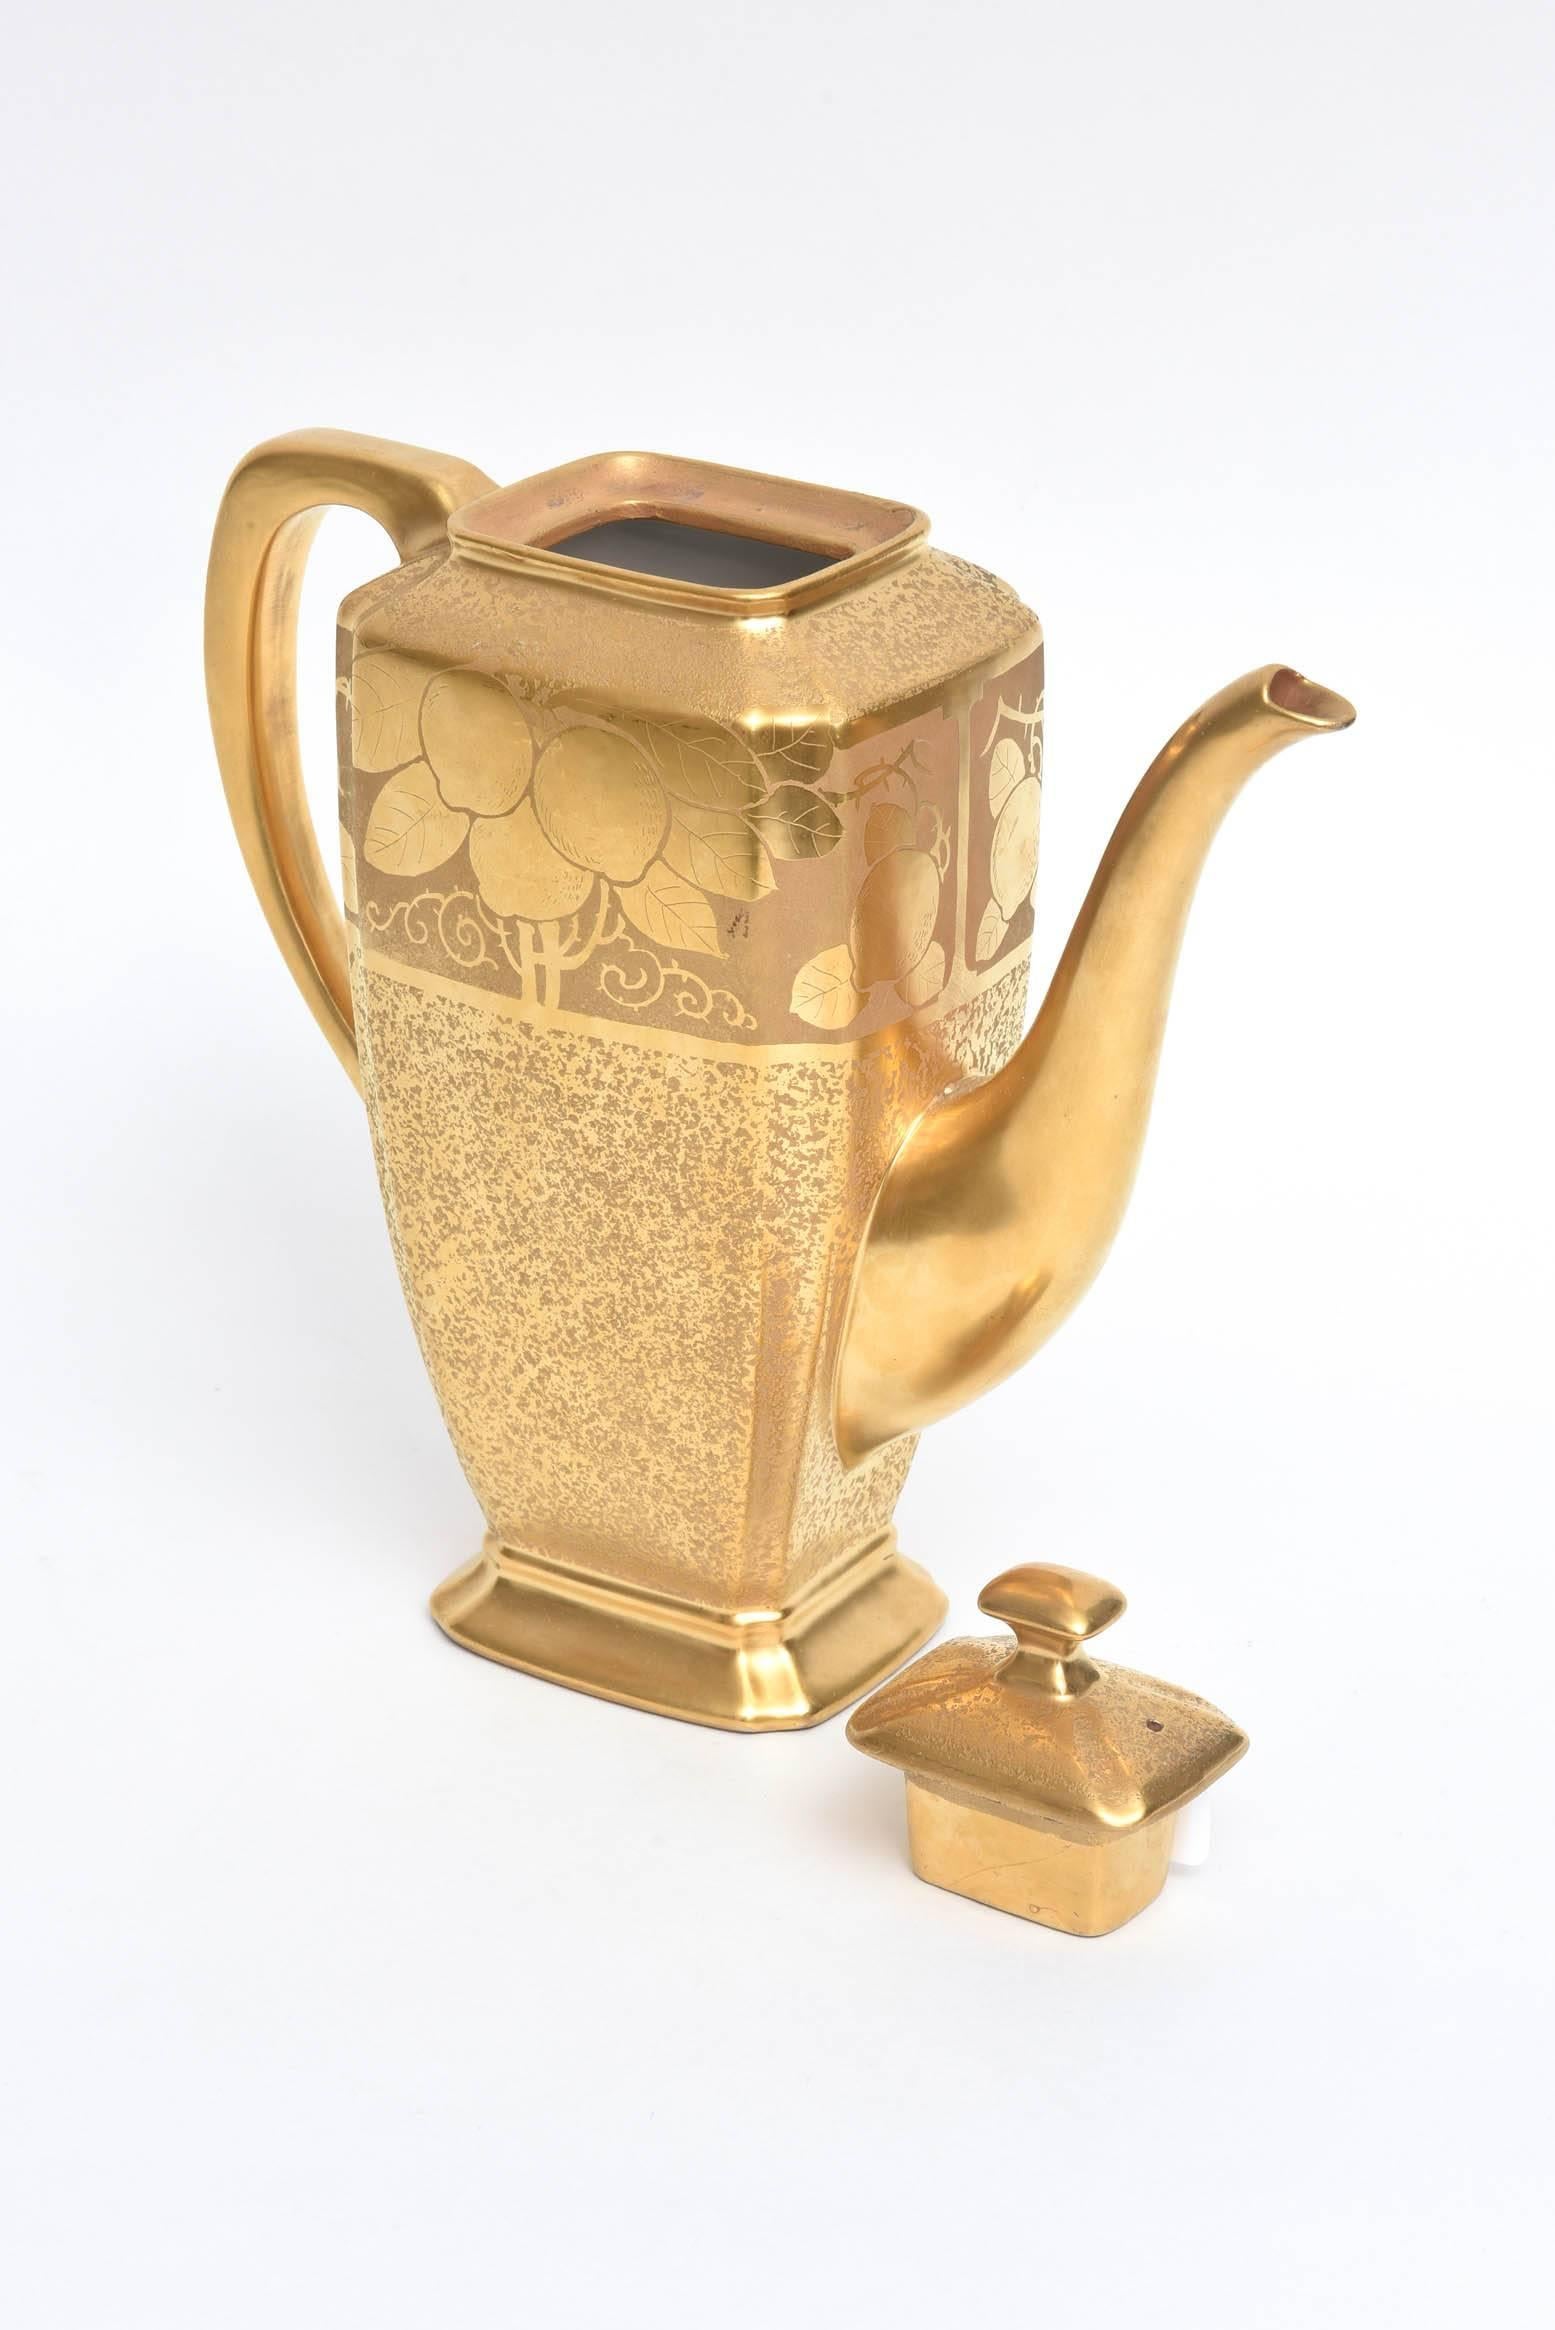 Early 20th Century Art Nouveau Style Gilt Encrusted Coffee Pot, Peacock and Floral